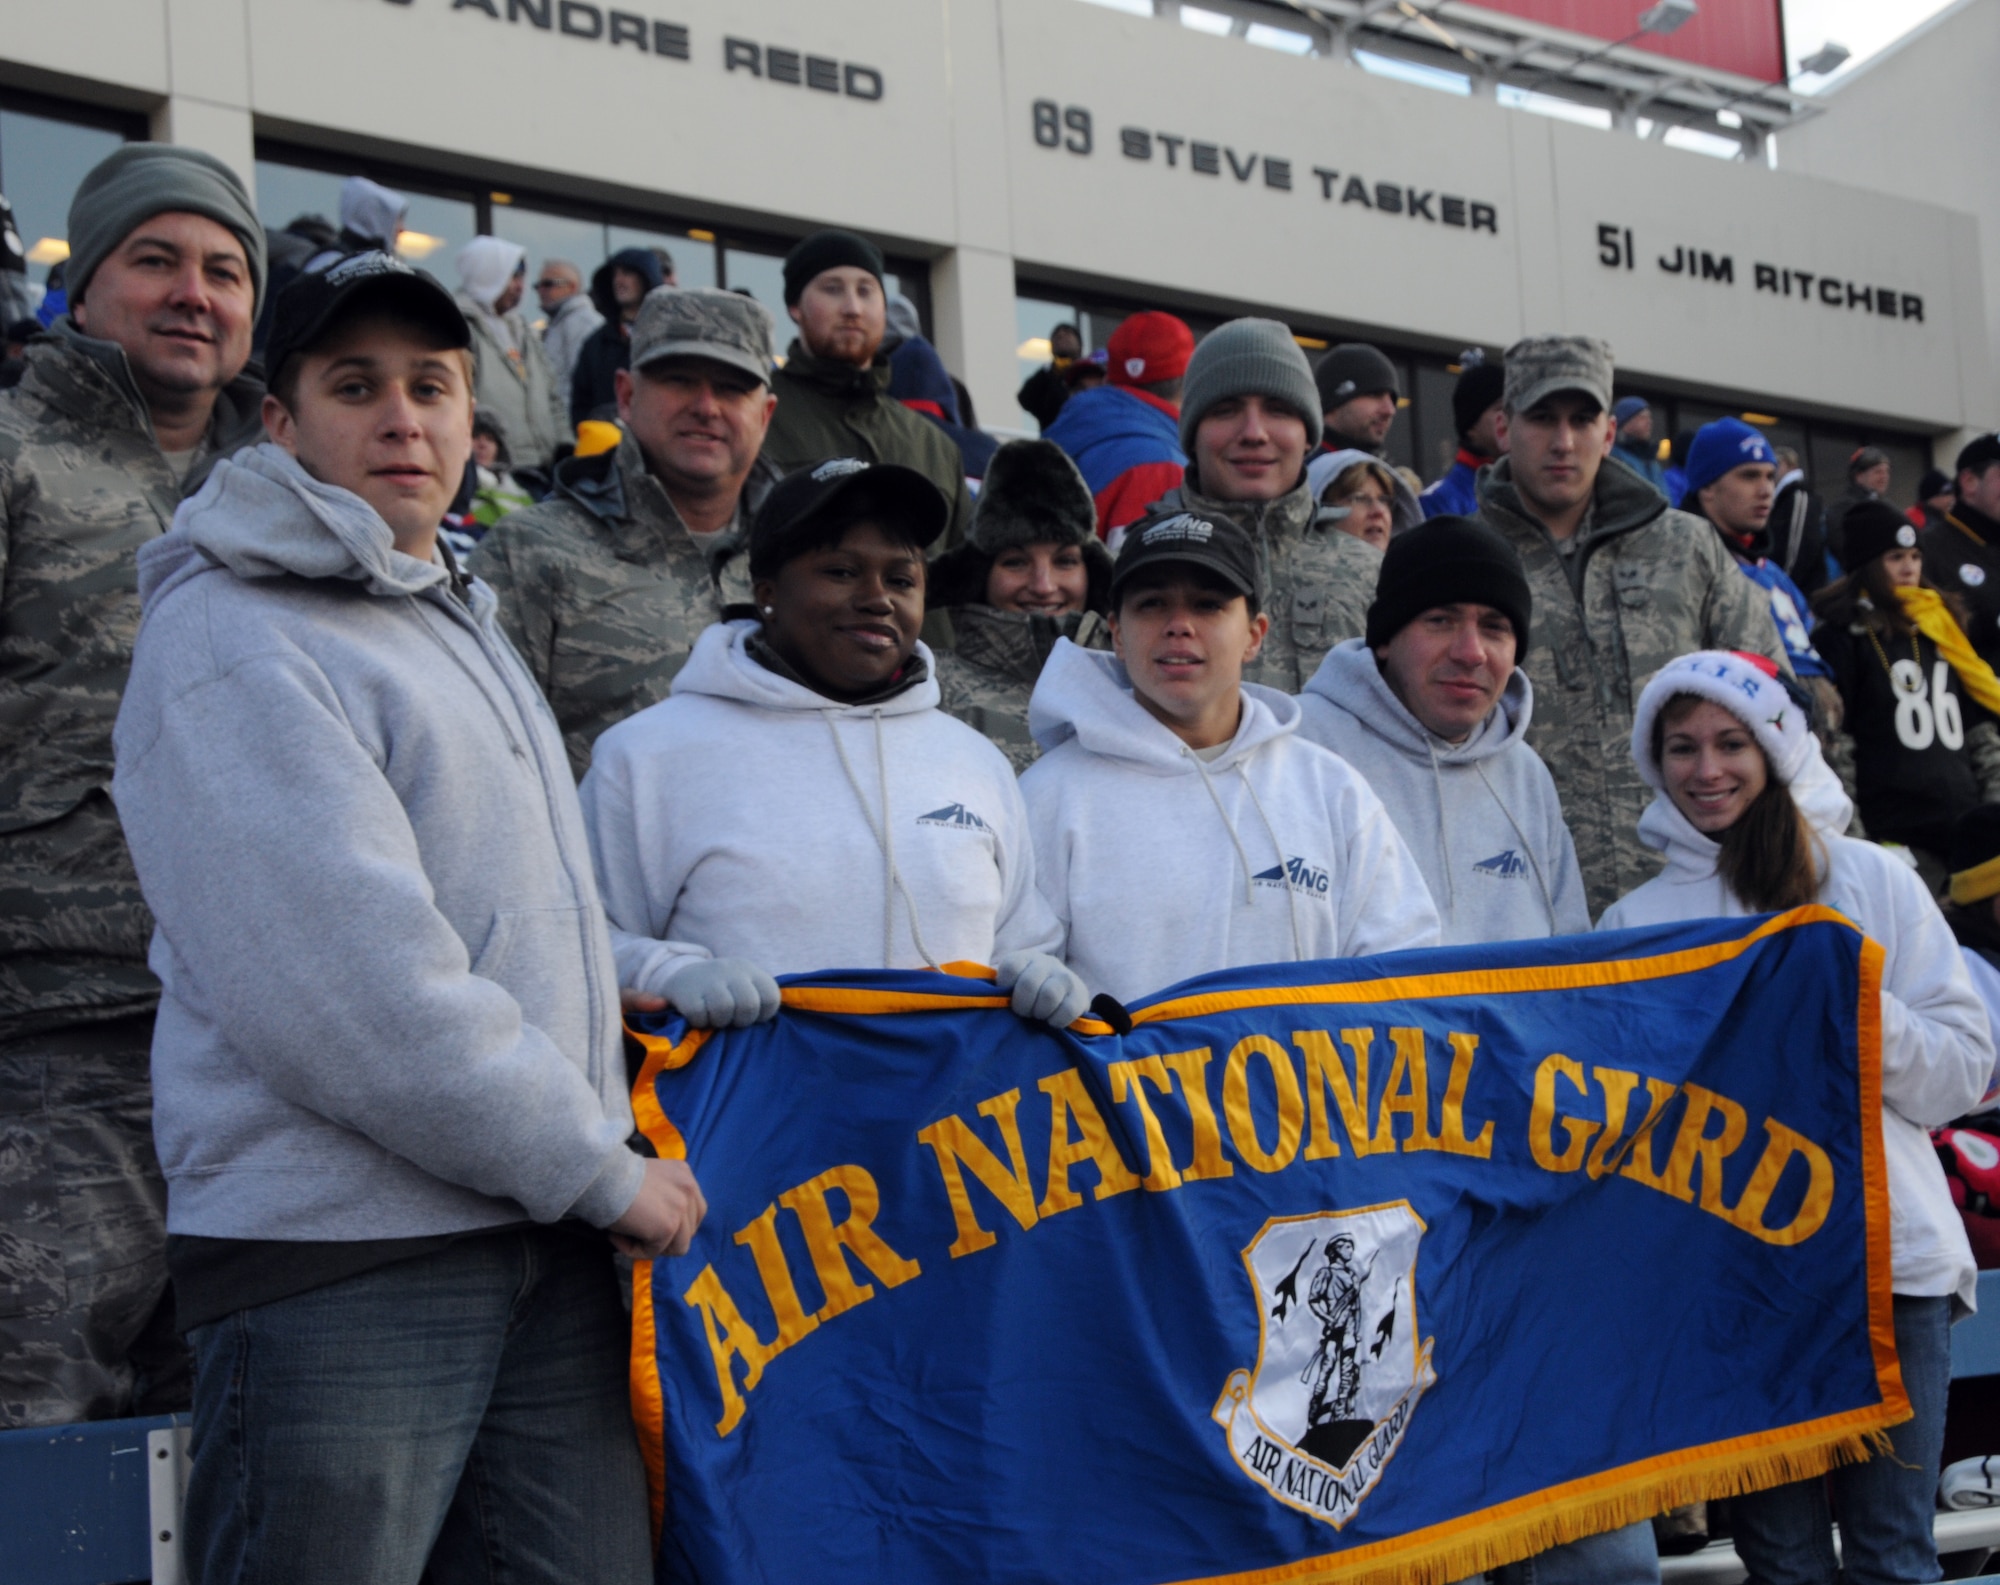 During Sunday's Buffalo Bills/Pittsburg Steelers game, the newest New York Air National Guard's 107th Airlift Wing enlistees (in the front row) took part in a pregame enlistment ceremony held on the Buffalo Bills field. After the ceremony the enlistees were joined by existing unit members to cheer on the Bills. Front row left to right, Airmen 1st Class Daniel Treblett, Christina Swanson, Cara Sturdivant and Joanna Vail. Back row left to right, Tech. Sgt. Patrick Paolini, Staff Sgt. Peter Dean, Tech. Sgt. Charity Edwards, Senior Airmen Robert Kurzdorfer and Paul Boser. (U.S. Air Force Photo/Tech. Sgt. Justin Huett)